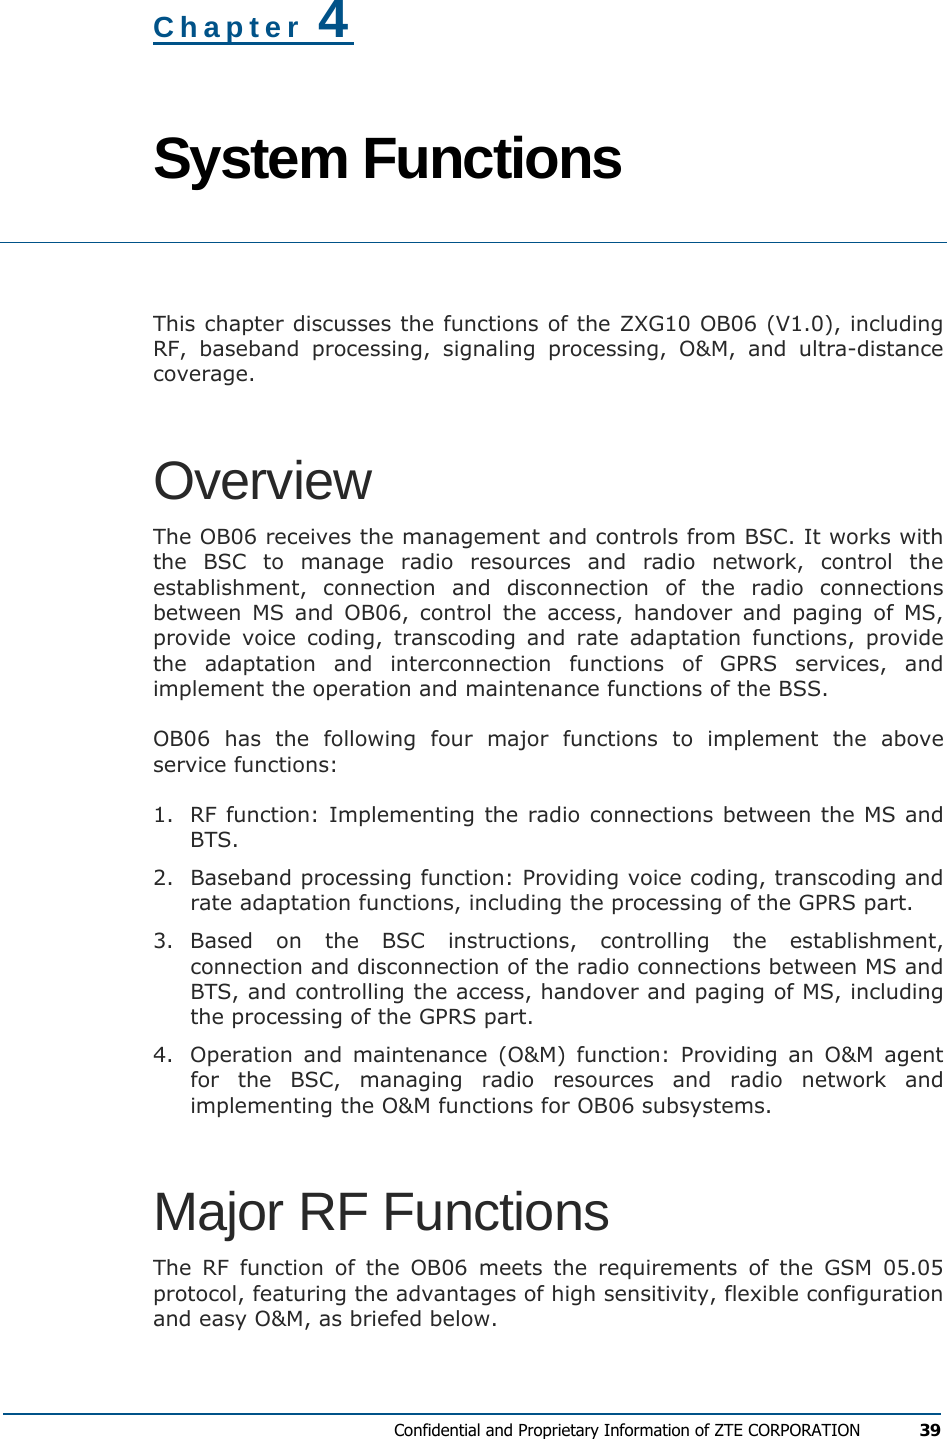  Confidential and Proprietary Information of ZTE CORPORATION 39  Chapter 4 System Functions  This chapter discusses the functions of the ZXG10 OB06 (V1.0), including RF, baseband processing, signaling processing, O&amp;M, and ultra-distance coverage. Overview The OB06 receives the management and controls from BSC. It works with the BSC to manage radio resources and radio network, control the establishment, connection and disconnection of the radio connections between MS and OB06, control the access, handover and paging of MS, provide voice coding, transcoding and rate adaptation functions, provide the adaptation and interconnection functions of GPRS services, and implement the operation and maintenance functions of the BSS. OB06 has the following four major functions to implement the above service functions: 1.  RF function: Implementing the radio connections between the MS and BTS. 2.  Baseband processing function: Providing voice coding, transcoding and rate adaptation functions, including the processing of the GPRS part. 3. Based on the BSC instructions, controlling the establishment, connection and disconnection of the radio connections between MS and BTS, and controlling the access, handover and paging of MS, including the processing of the GPRS part. 4.  Operation and maintenance (O&amp;M) function: Providing an O&amp;M agent for the BSC, managing radio resources and radio network and implementing the O&amp;M functions for OB06 subsystems. Major RF Functions The RF function of the OB06 meets the requirements of the GSM 05.05 protocol, featuring the advantages of high sensitivity, flexible configuration and easy O&amp;M, as briefed below. 